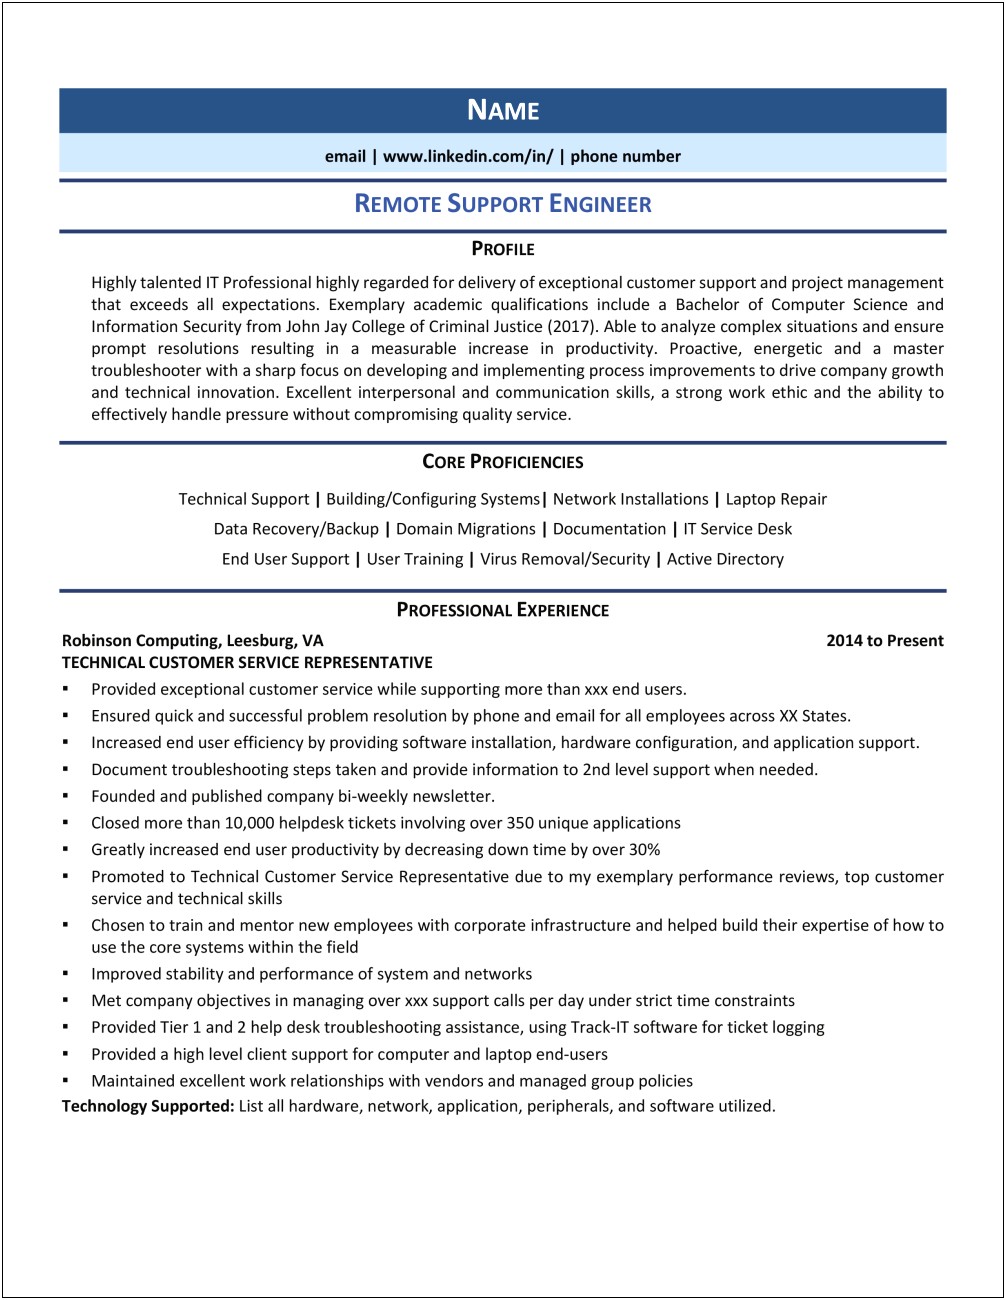 Technical Support Engineer Resume 3 Years Experience